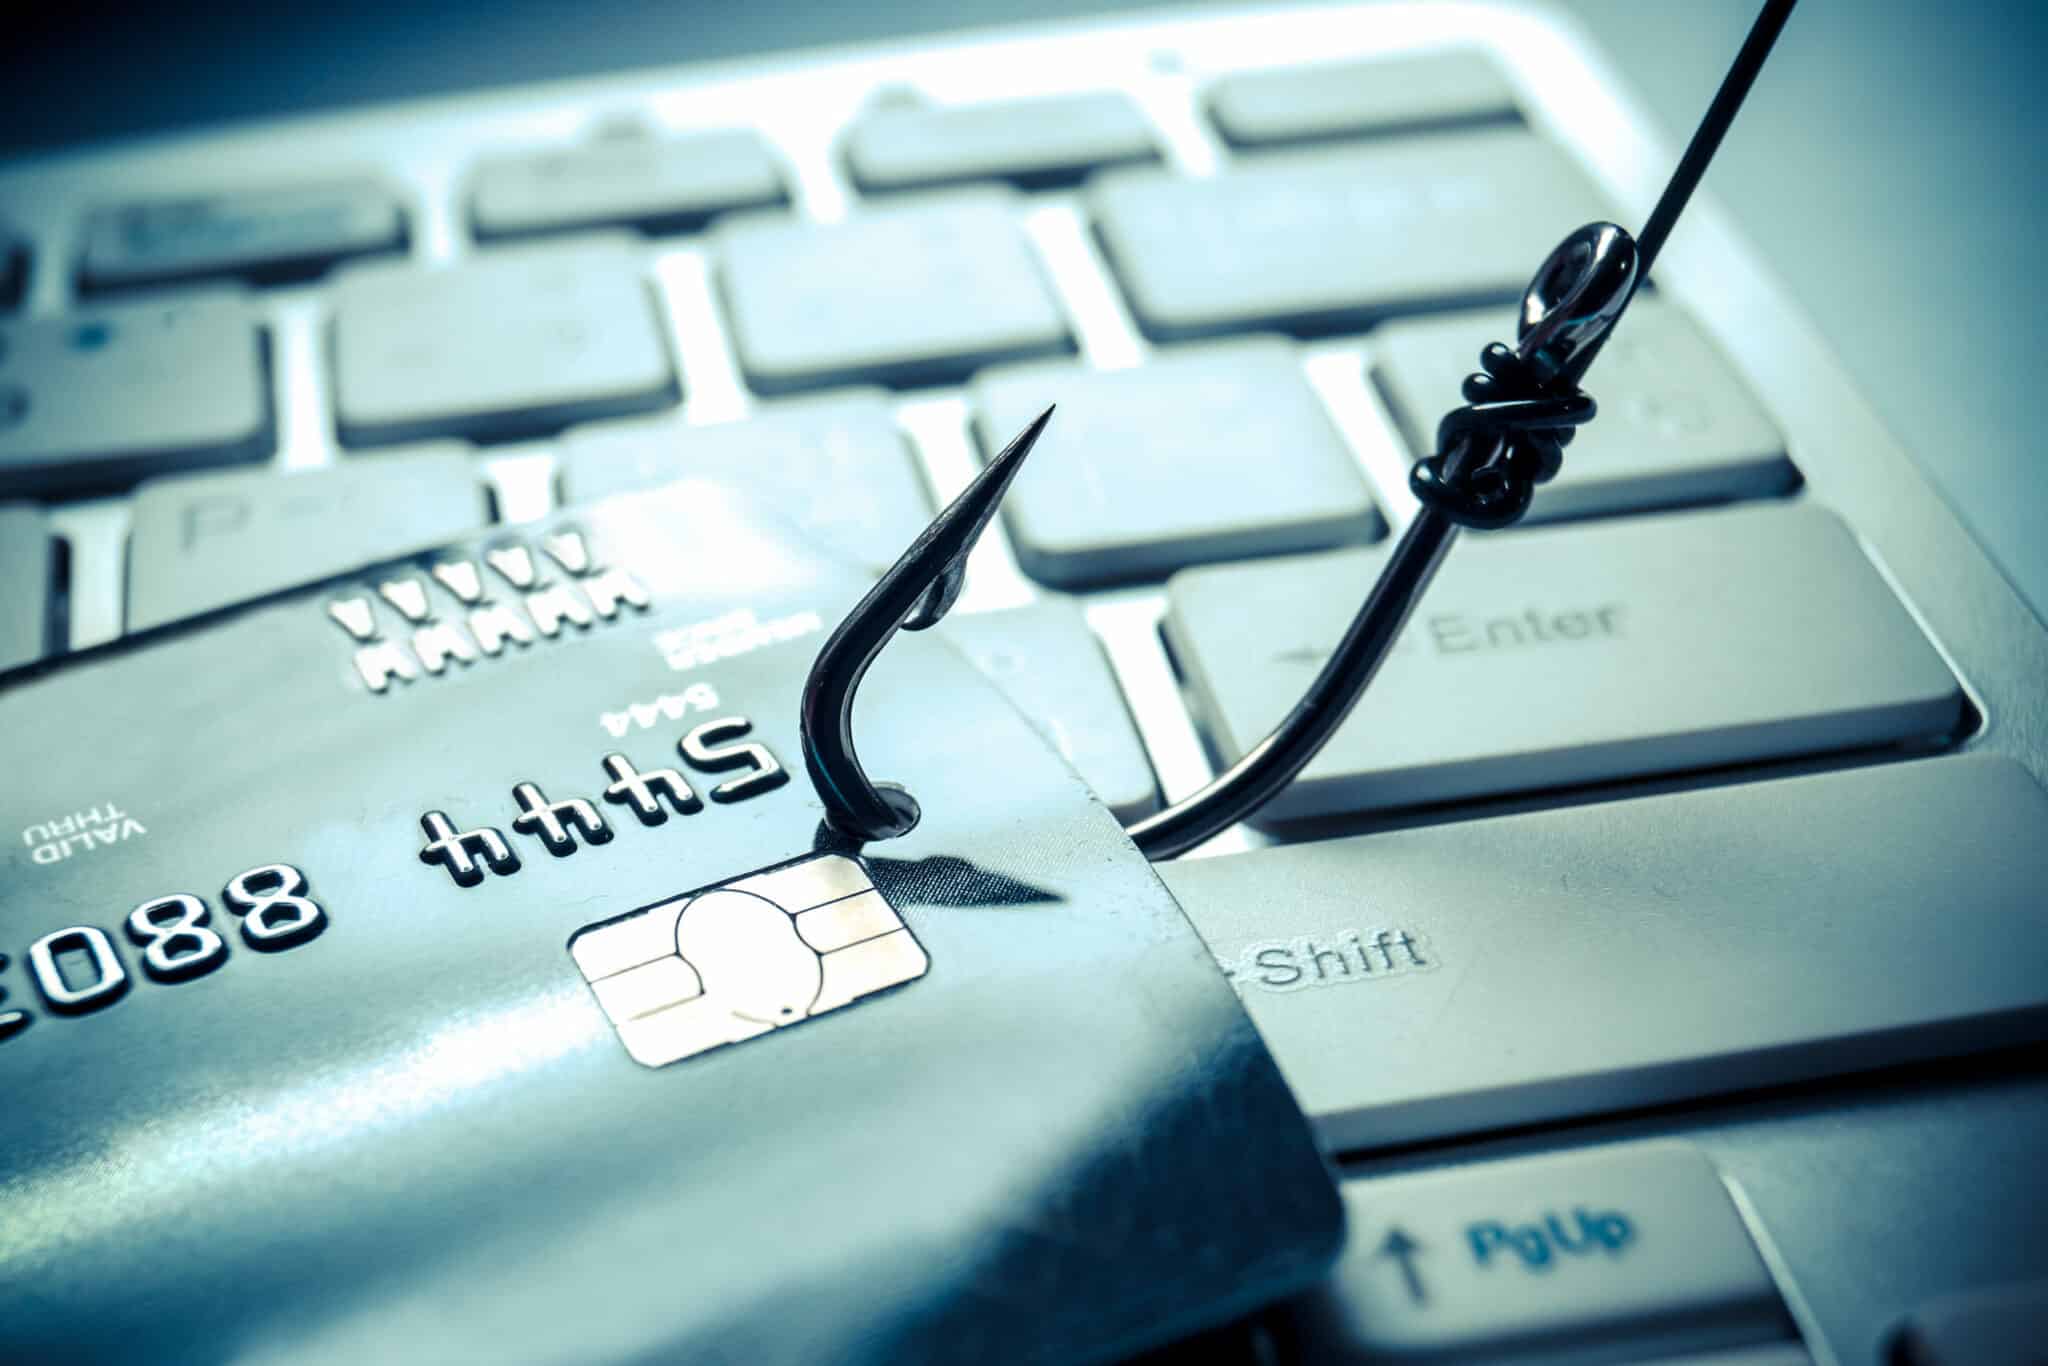 Phishing: The Warning Signs & How to Protect Yourself